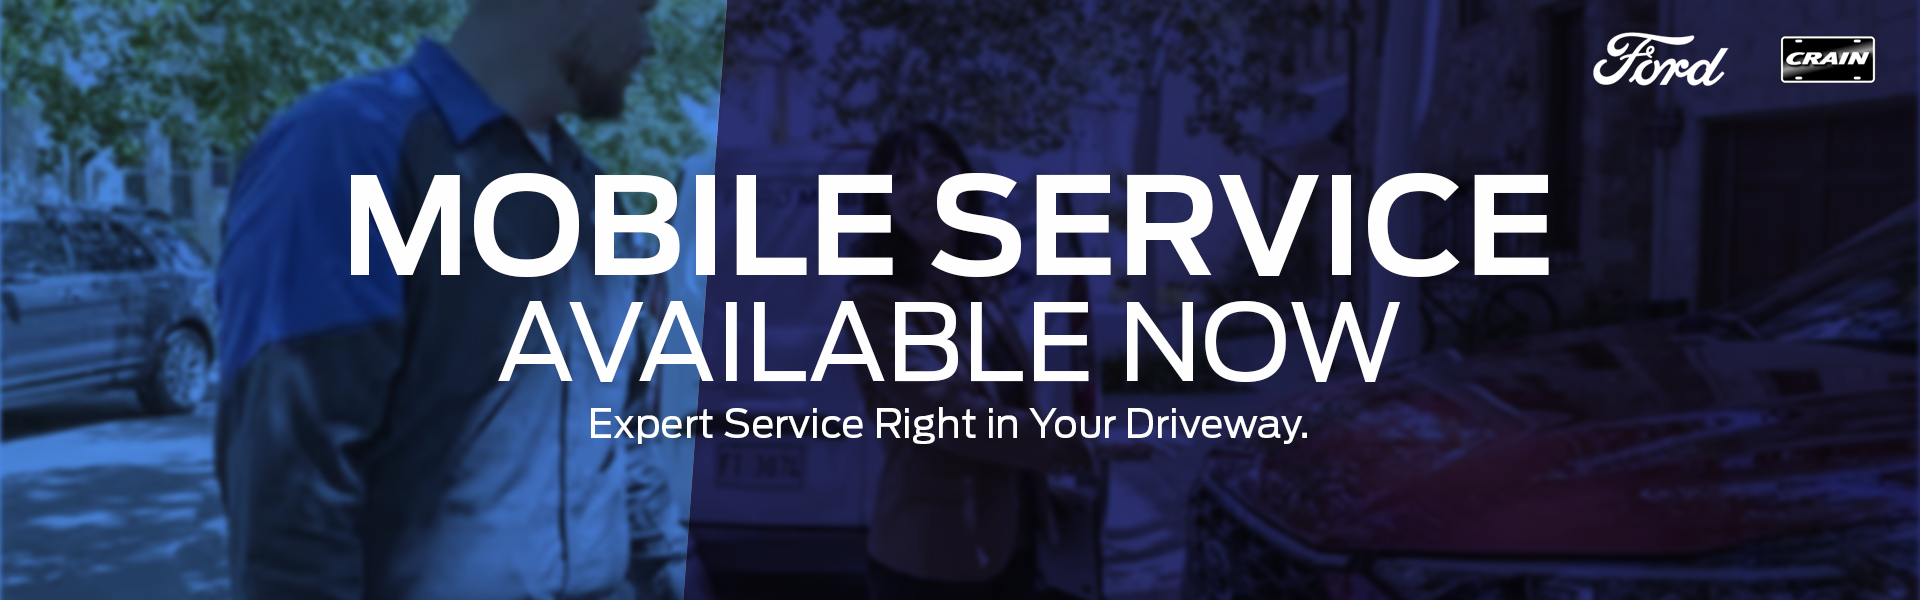 Ford Mobile Service